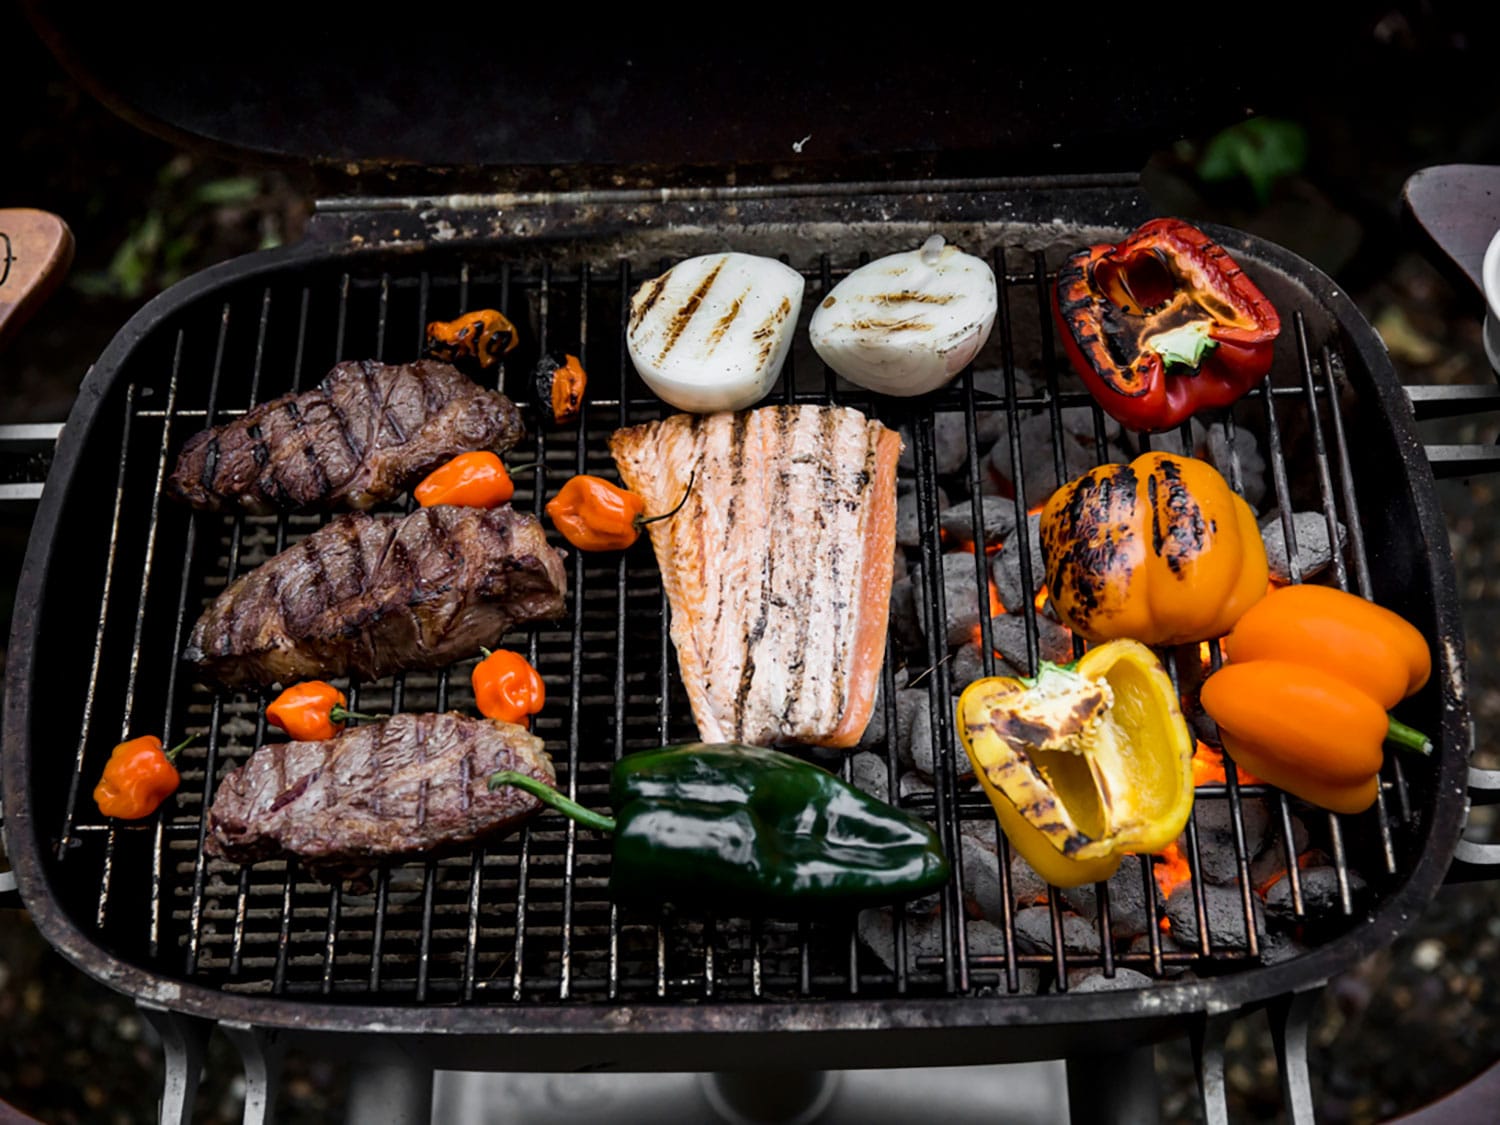 An open PK Grills PK360 grill and smoker being used to cook multiple steaks, fish, and peppers.